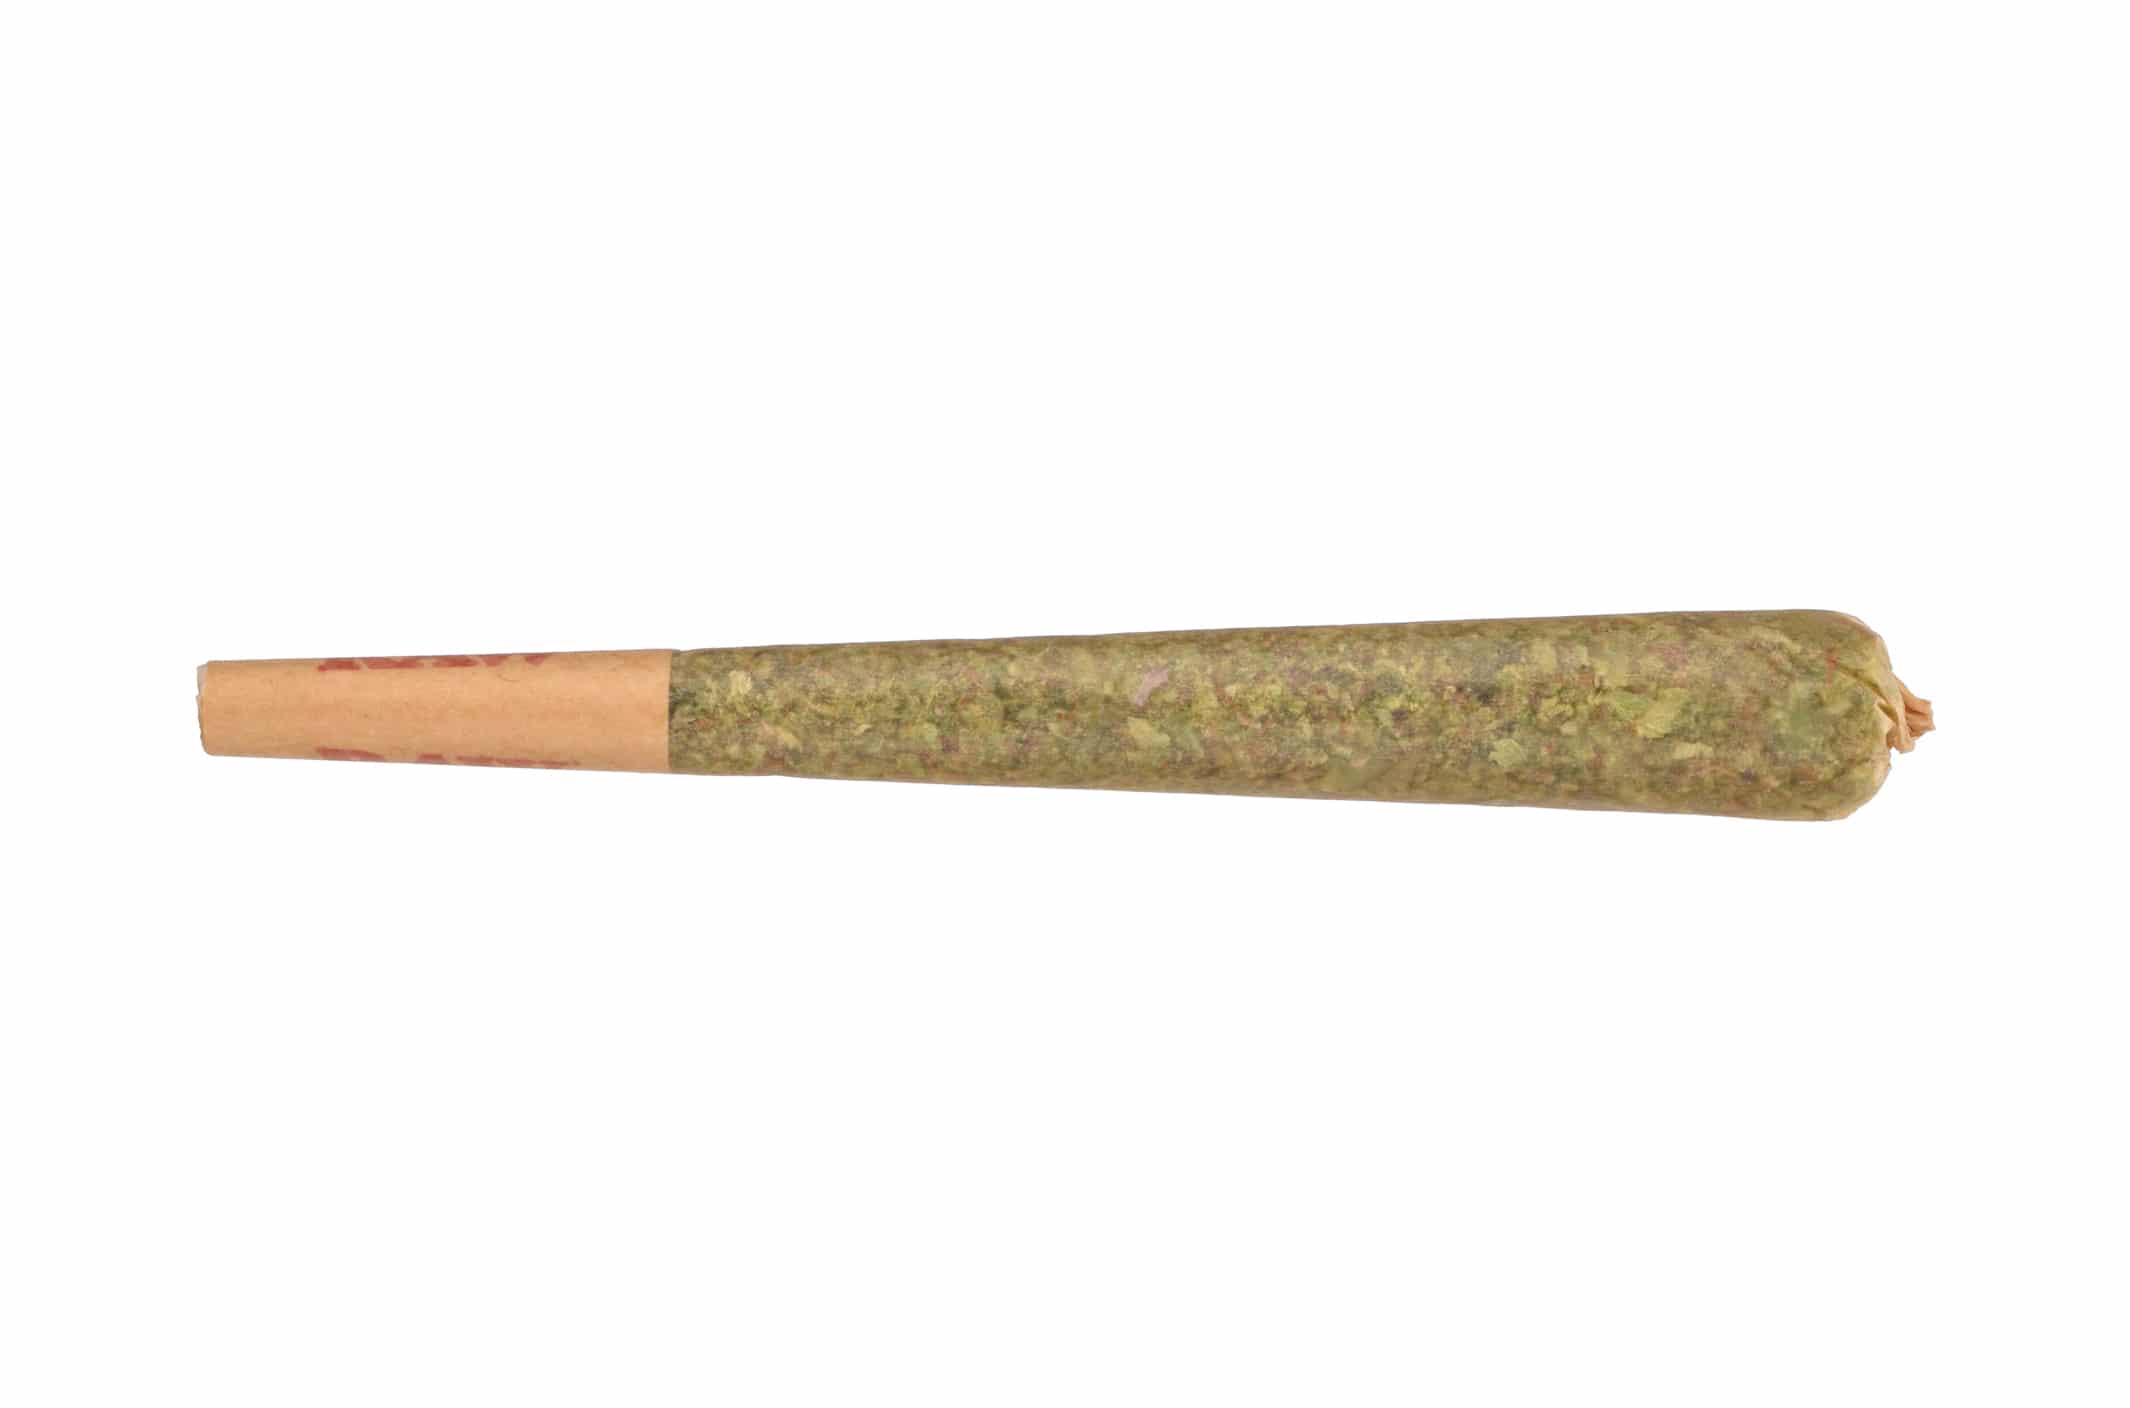 Shop The Best Pre-Rolls in New England